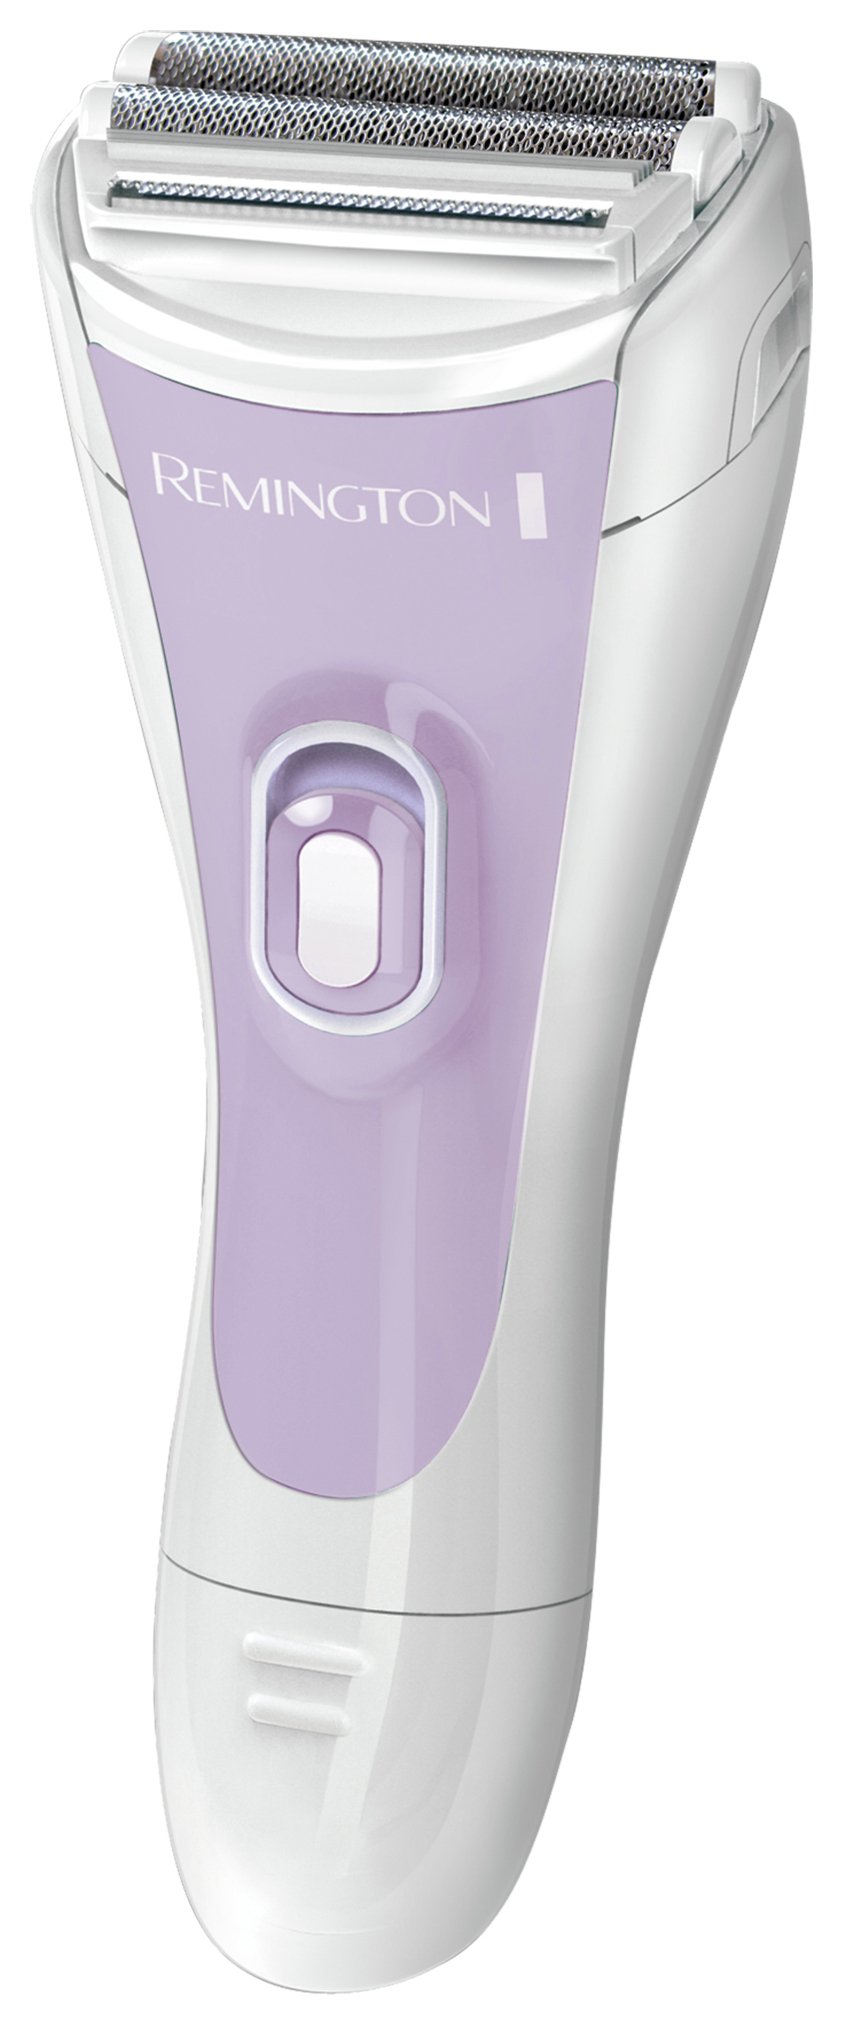 Remington Smooth & Silky Wet and Dry Cordless Lady Shaver